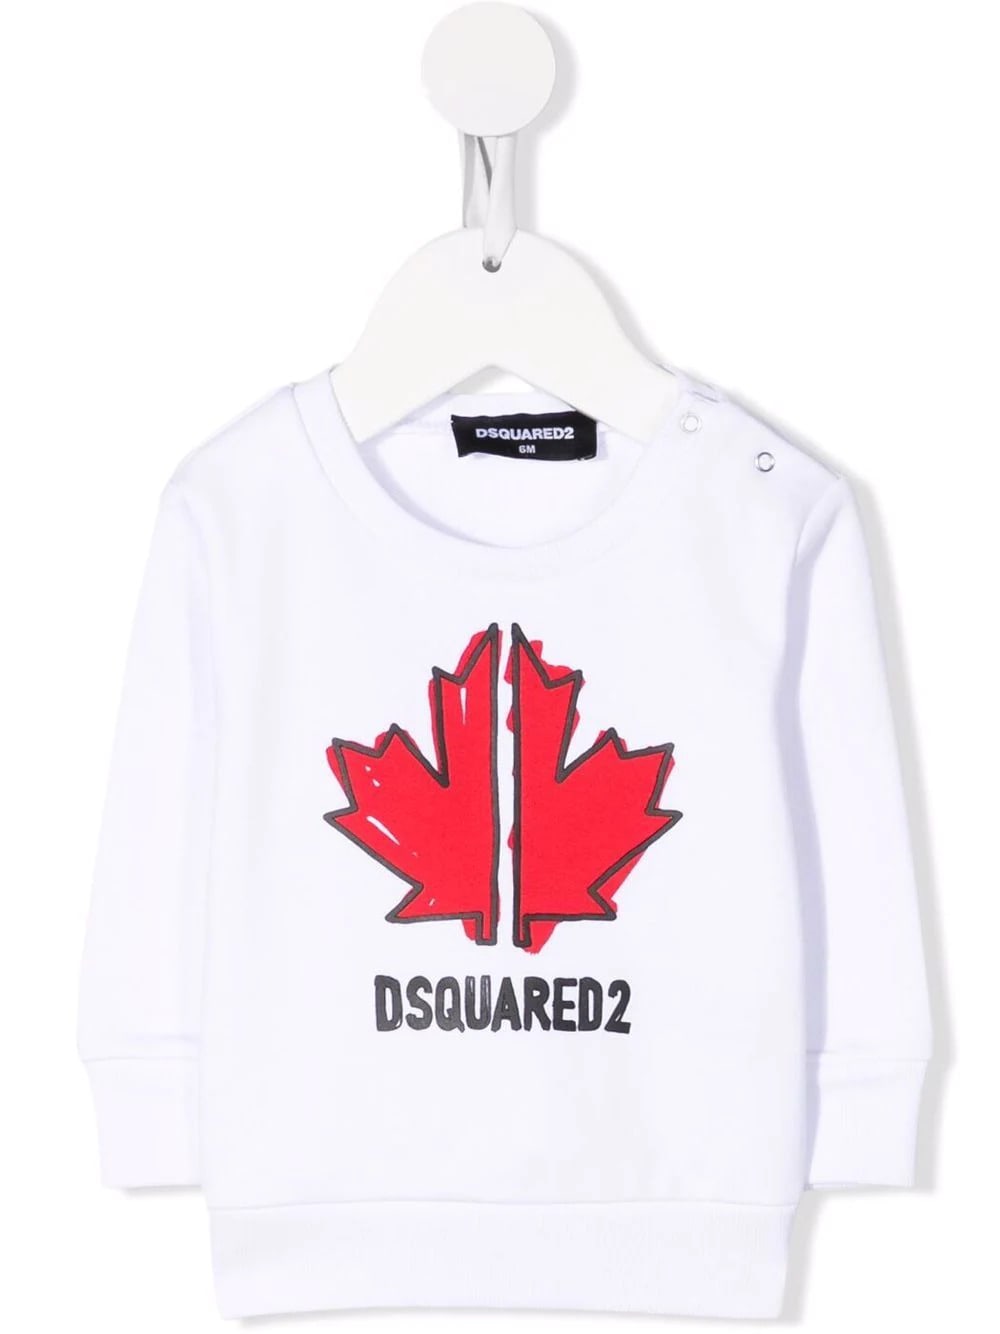 Dsquared2 Kids White Sweatshirt With Front And Back Sport Edtn.05 Print